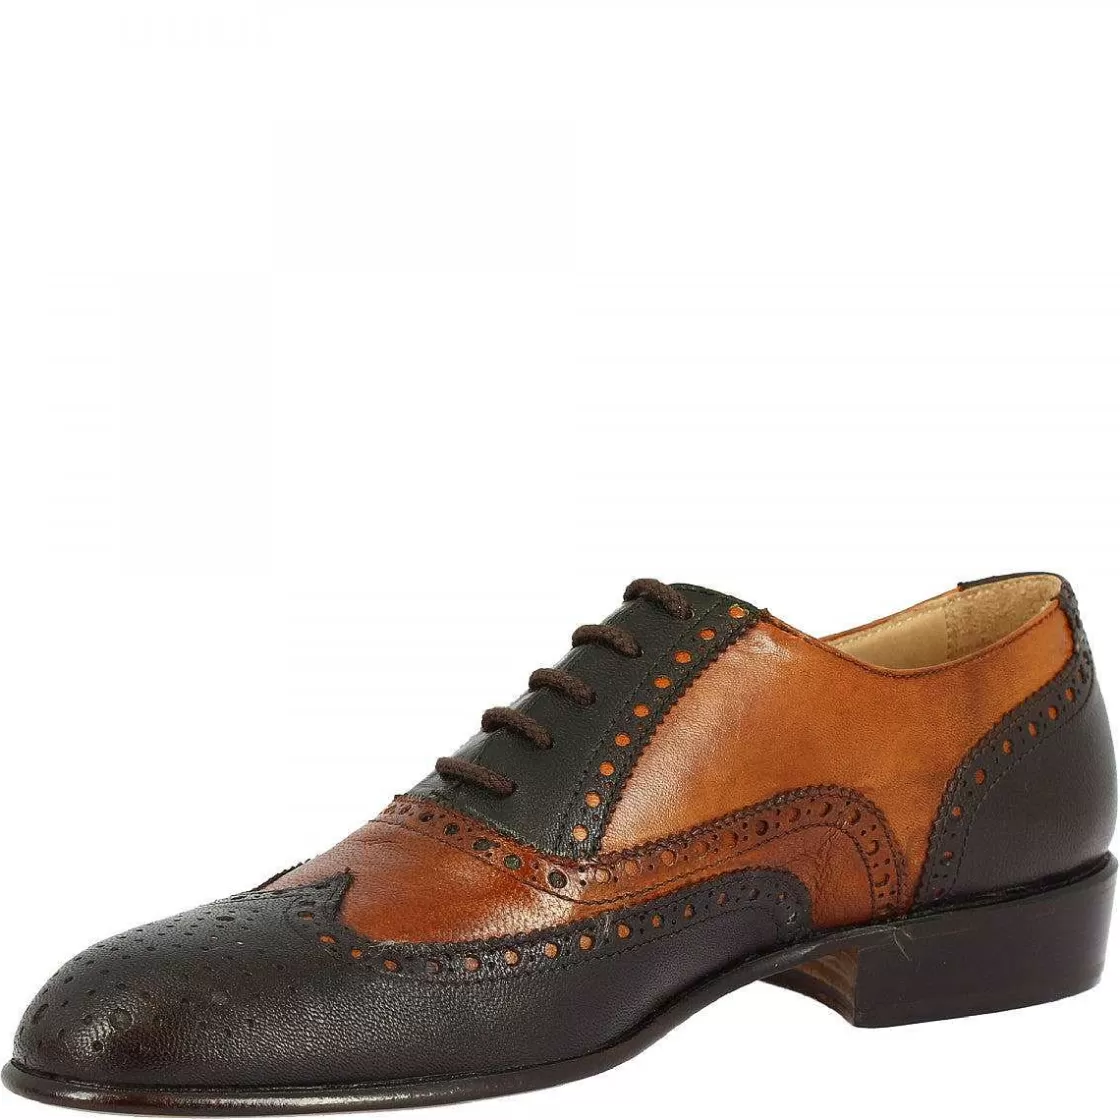 Leonardo Handmade Women'S Brogues Shoes In Dark Brown And Dark Brown Calf And Goat Leather Fashion